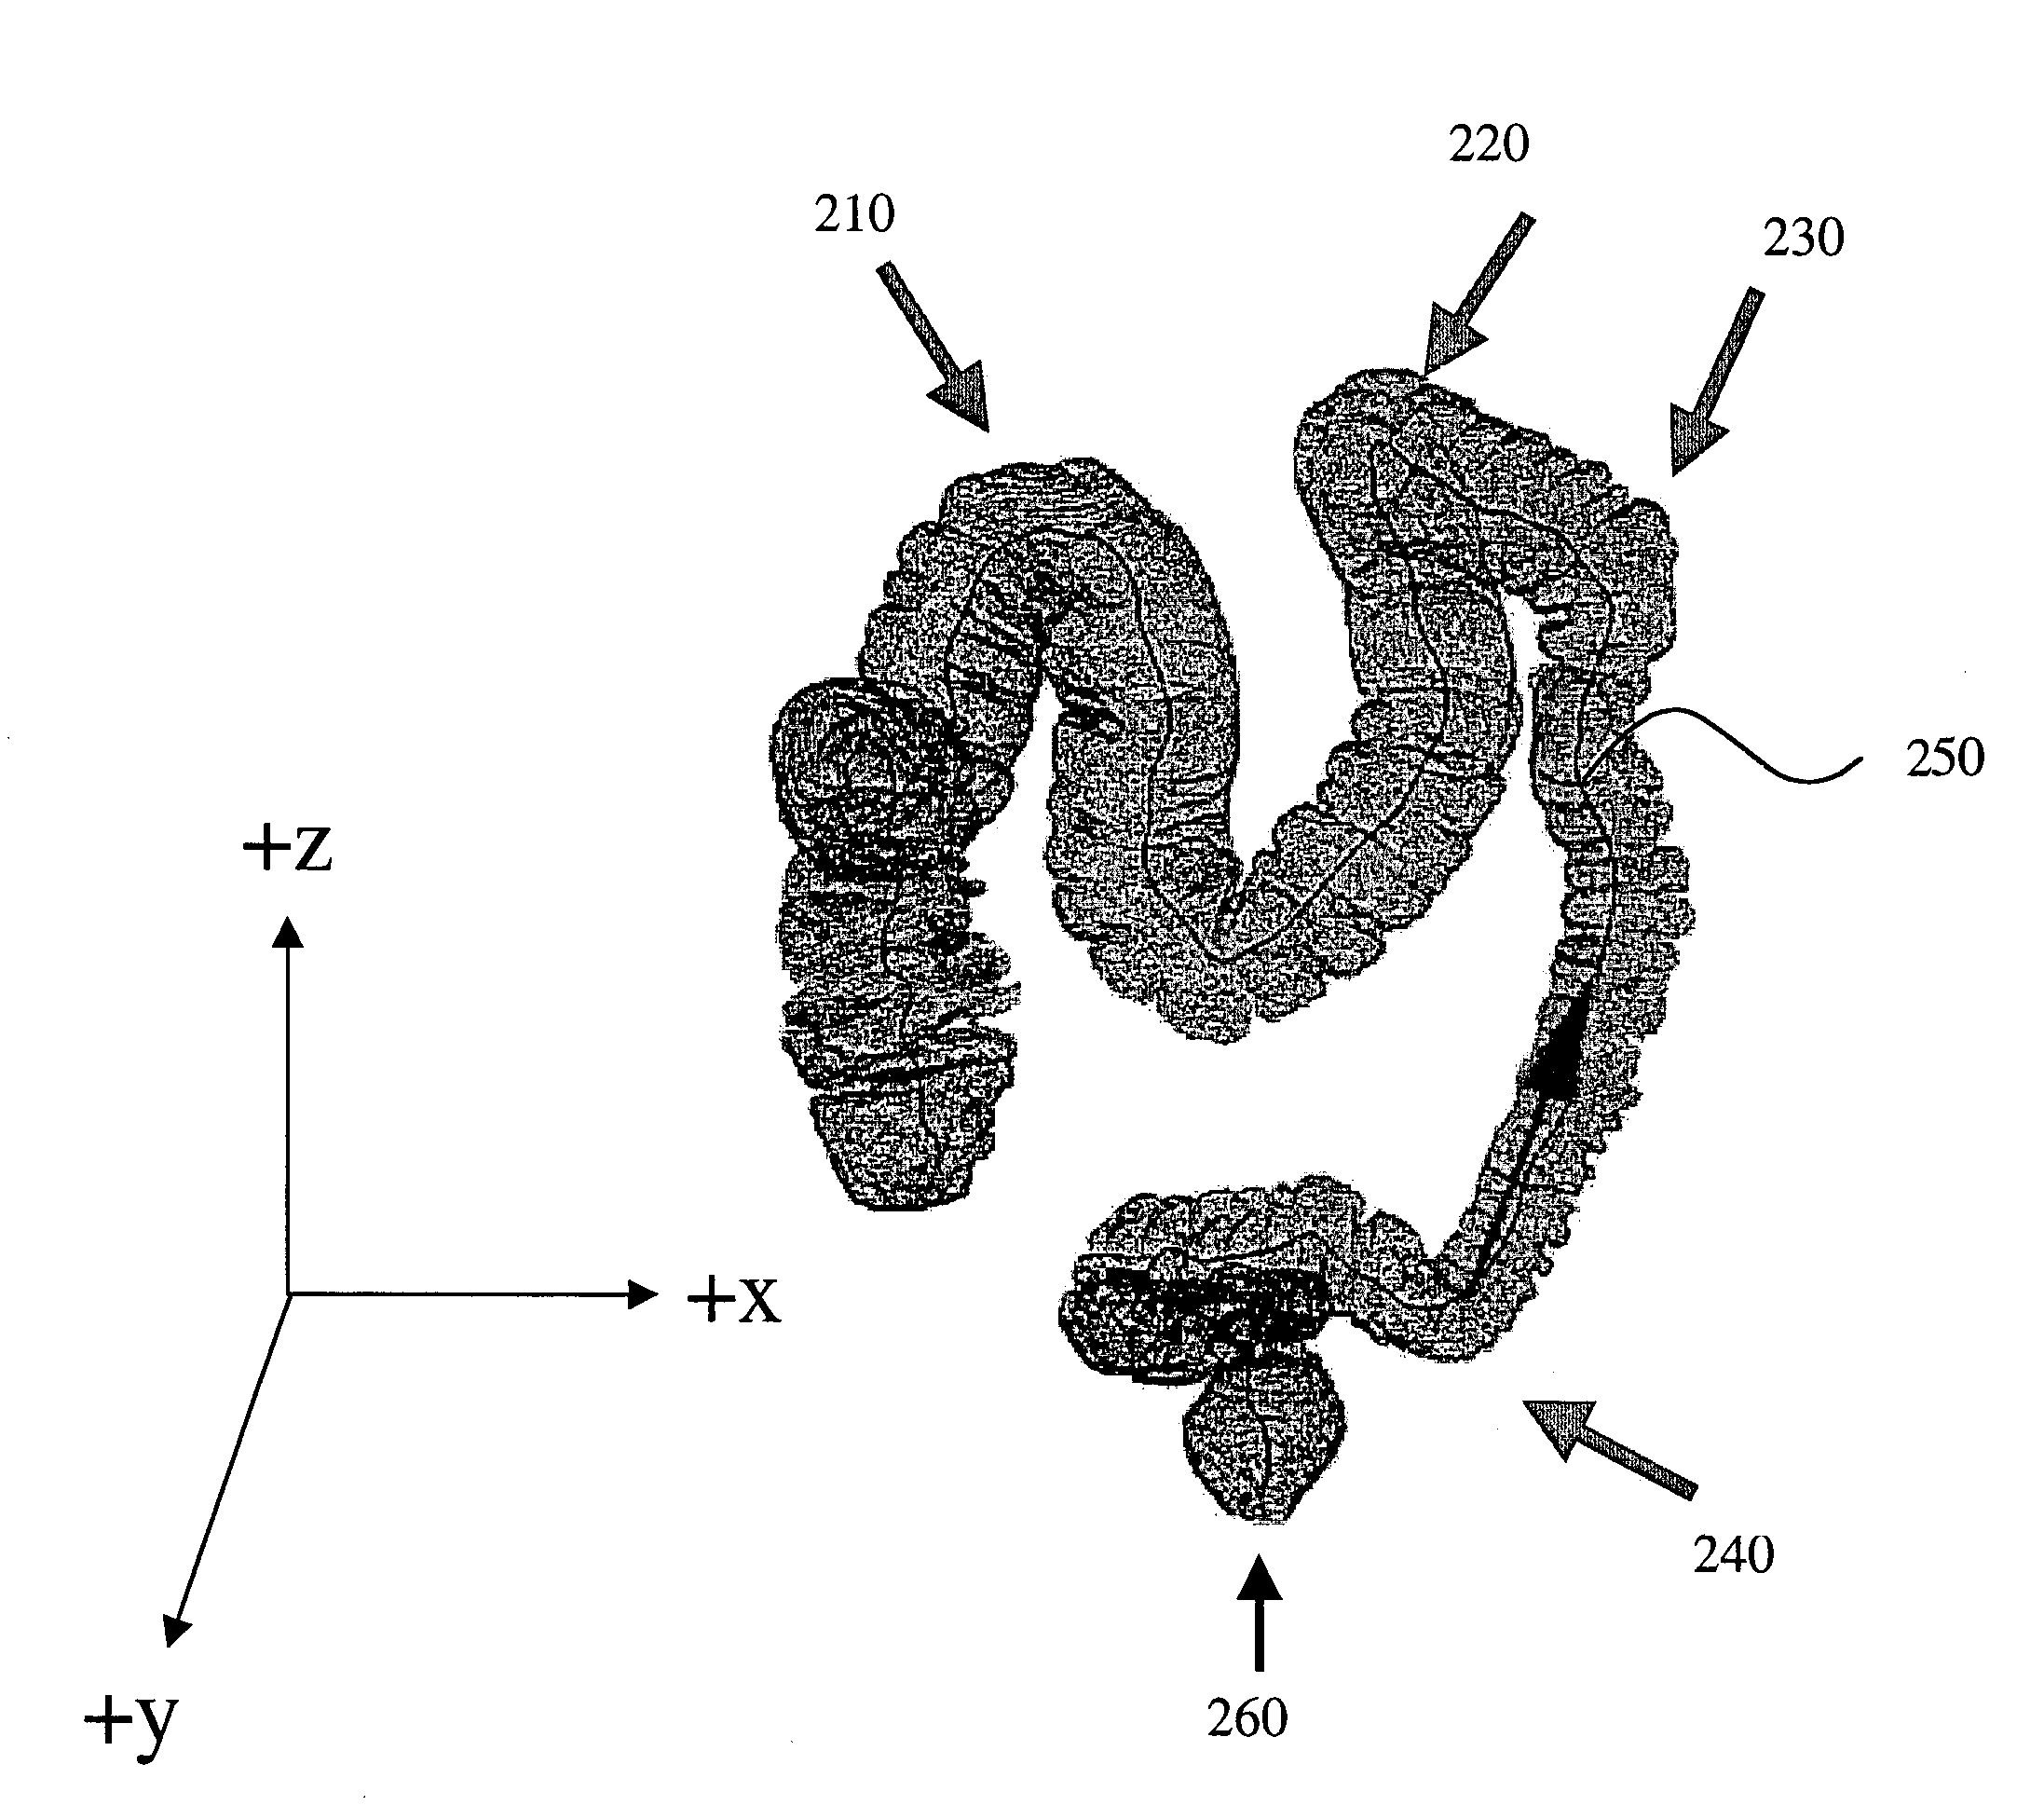 Method for matching and registering medical image data